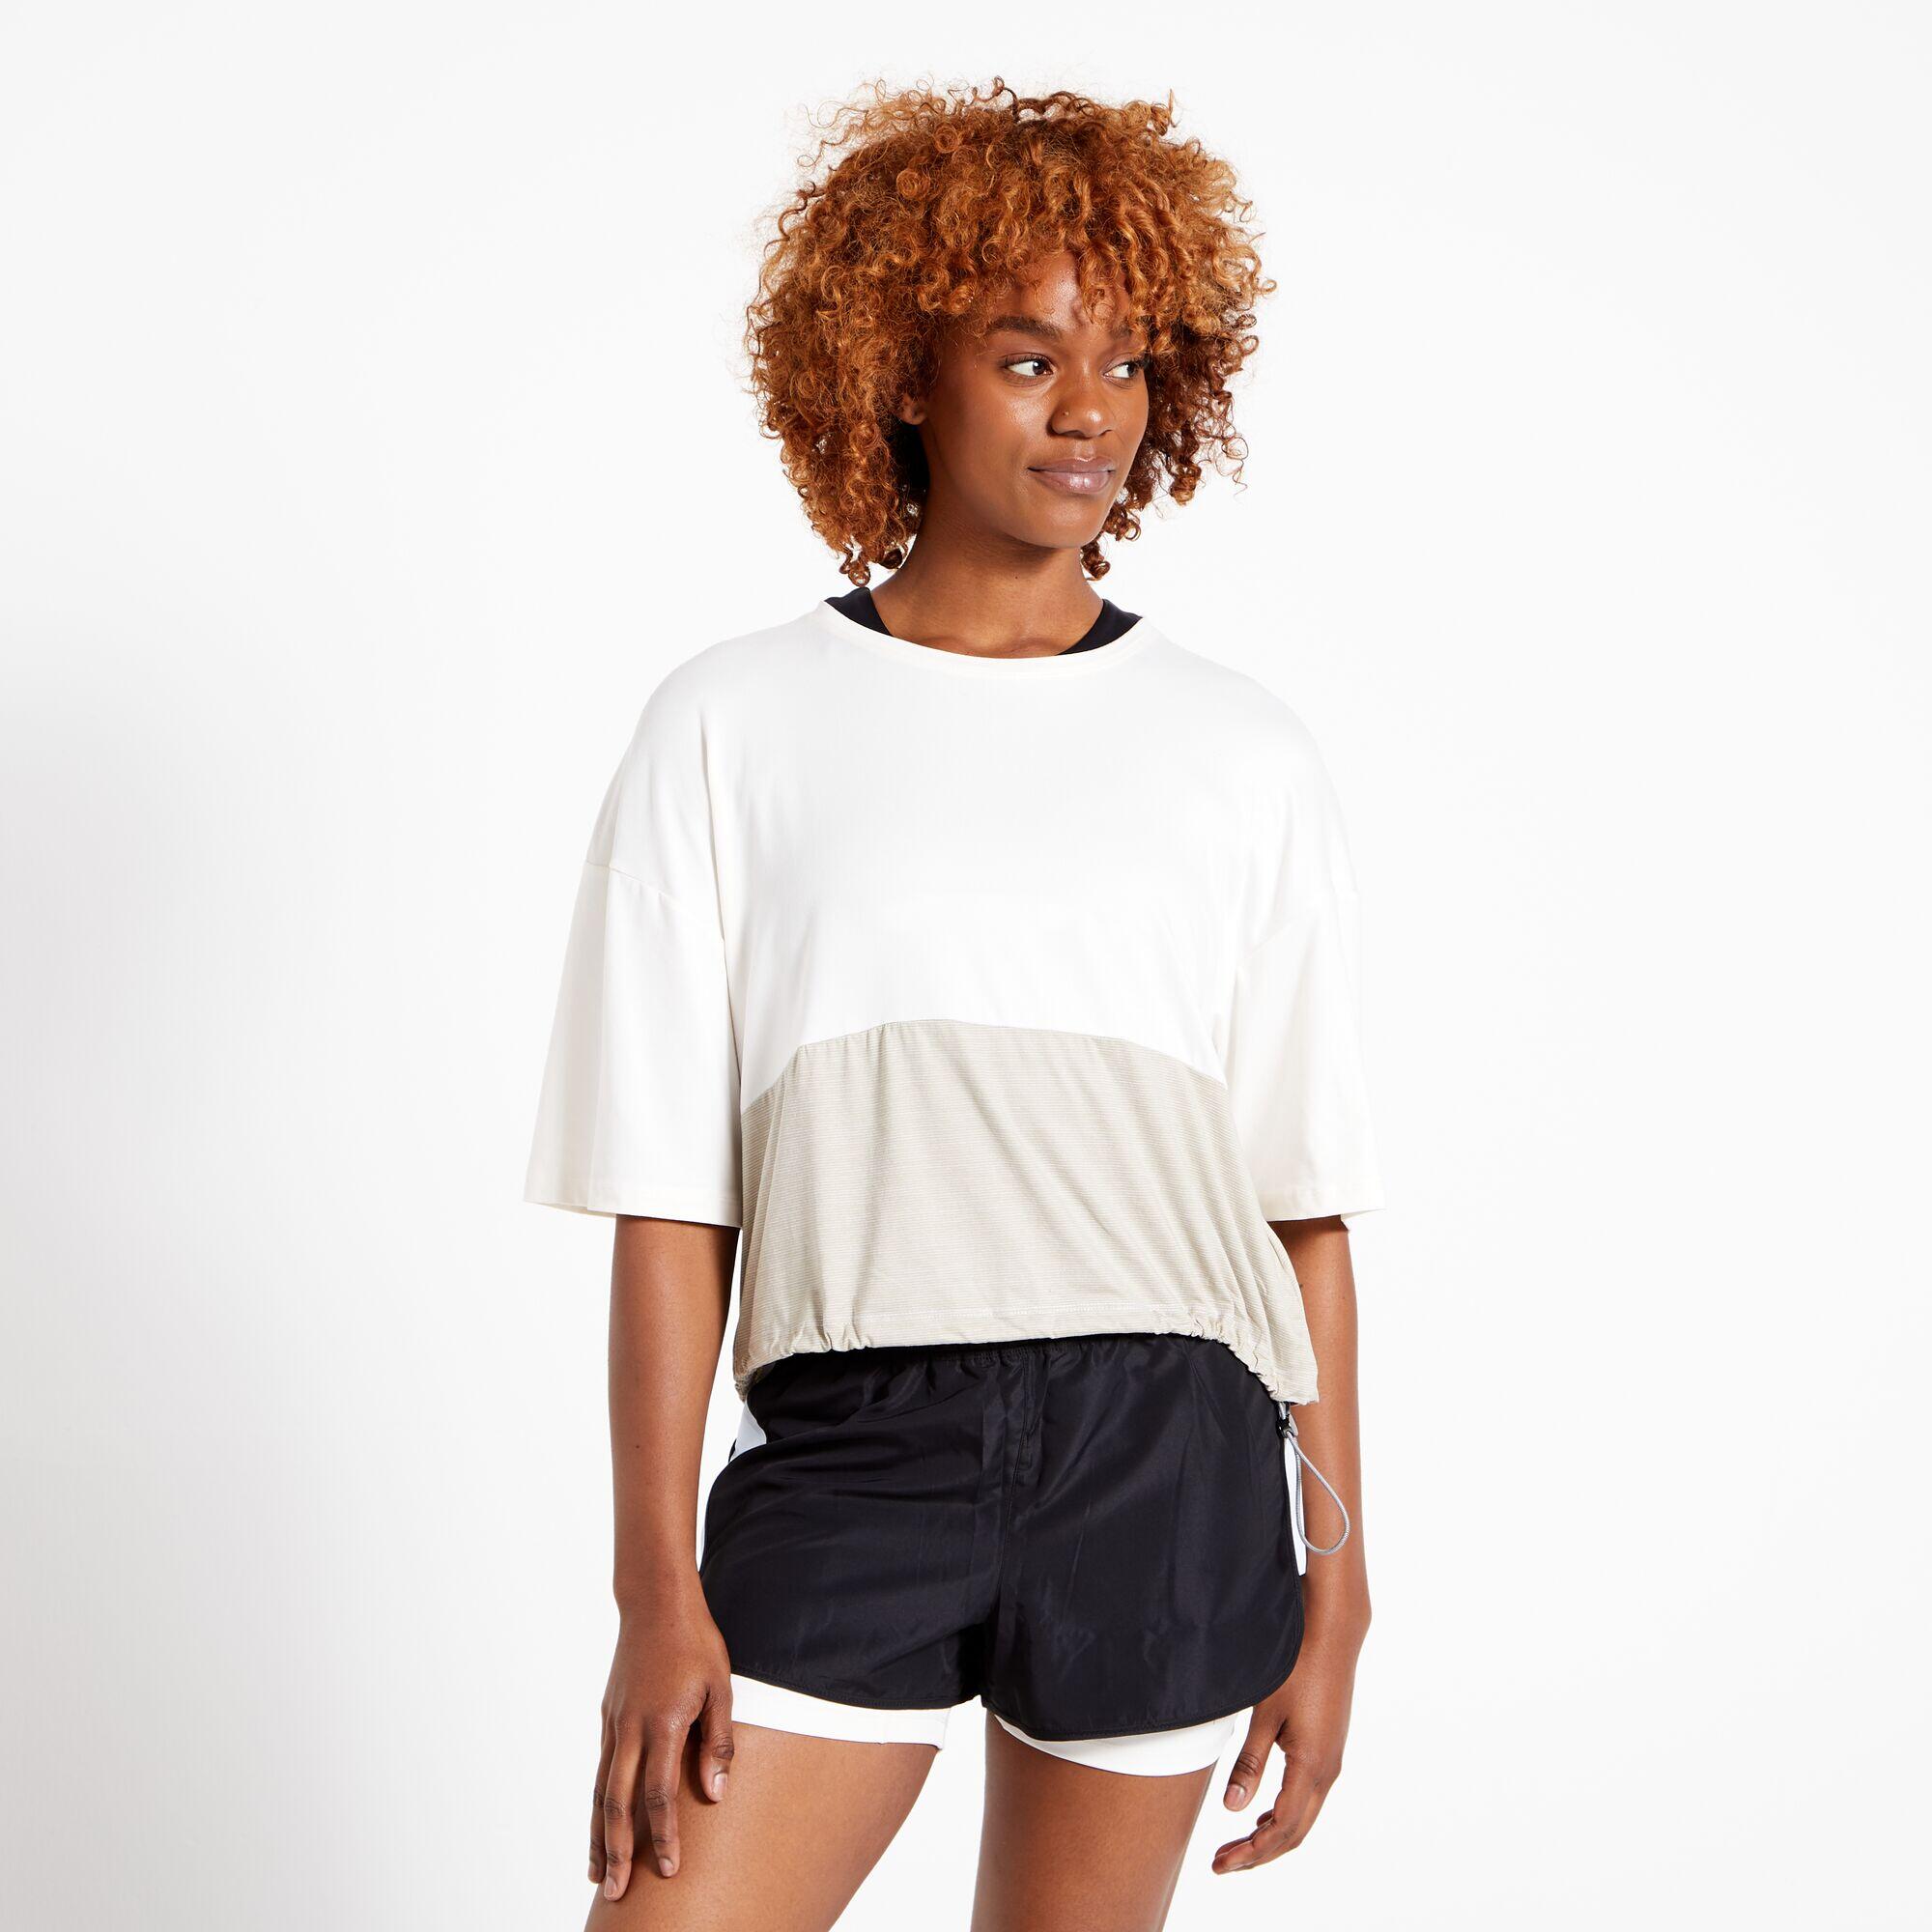 Henry Holland Cut Loose Womens Gym T-Shirt - White 1/5